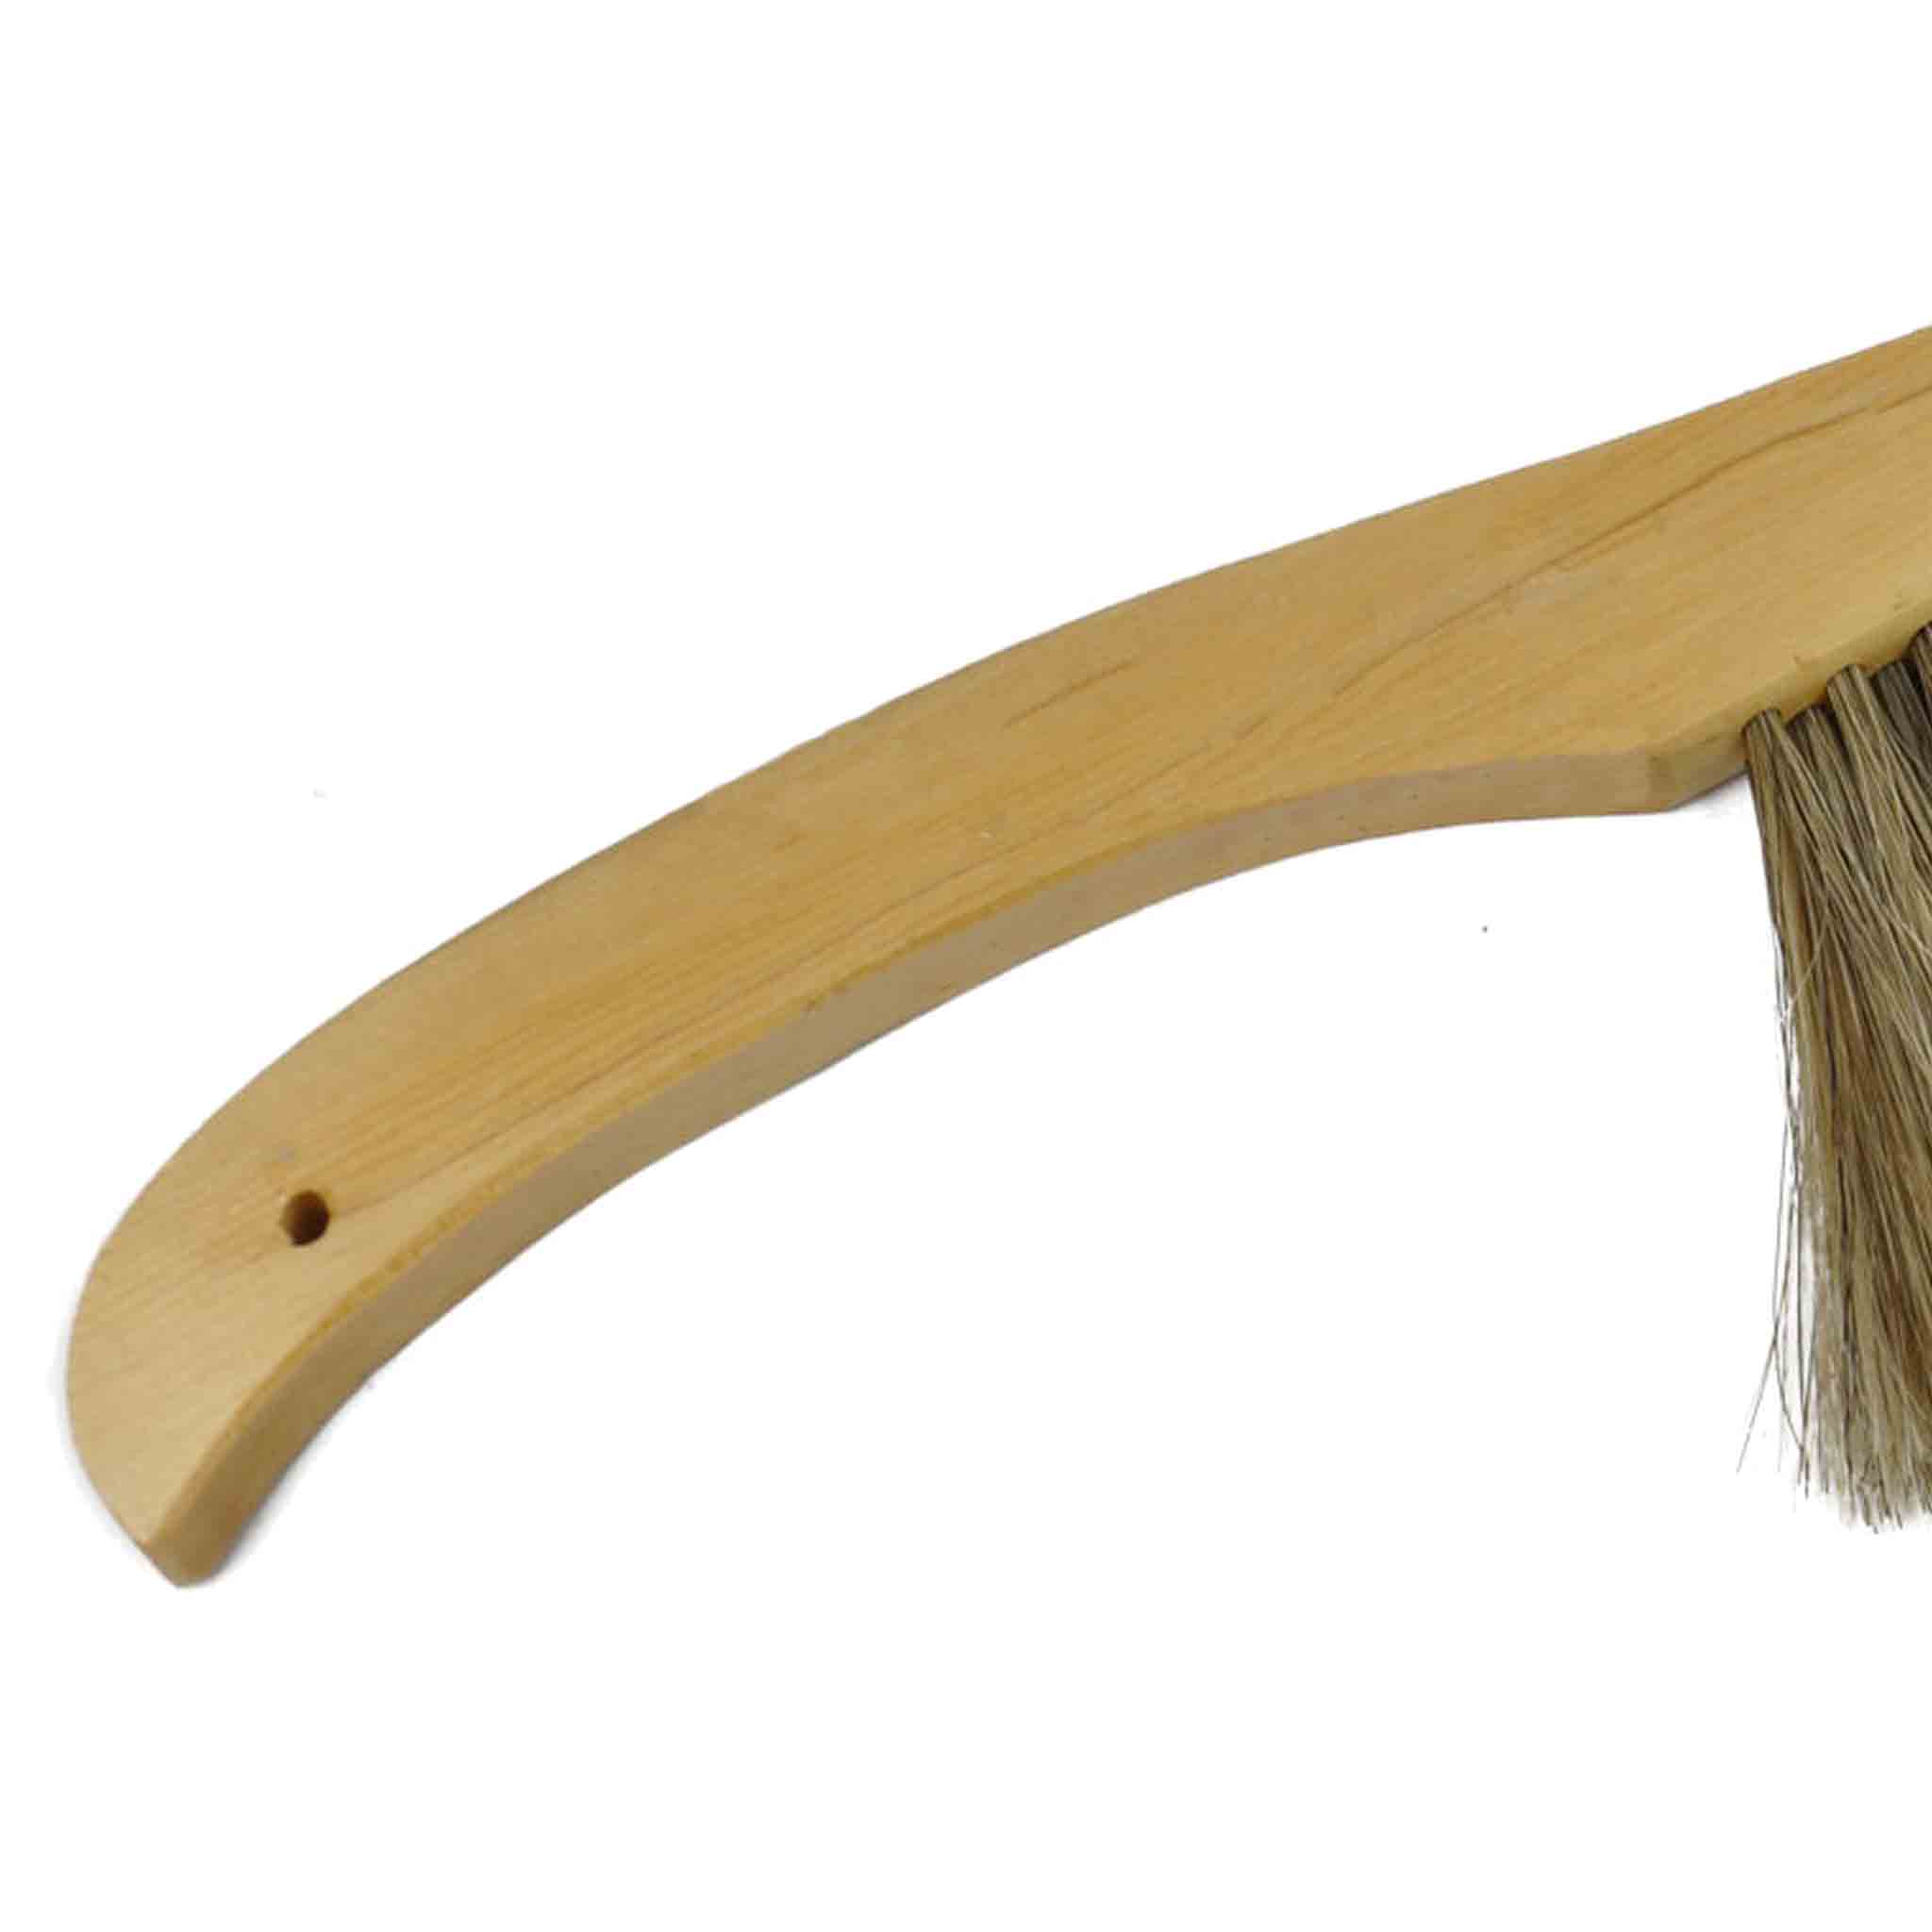 Bee Brush with Triple Bristle and Wooden Handle - Tools collection by Buzzbee Beekeeping Supplies